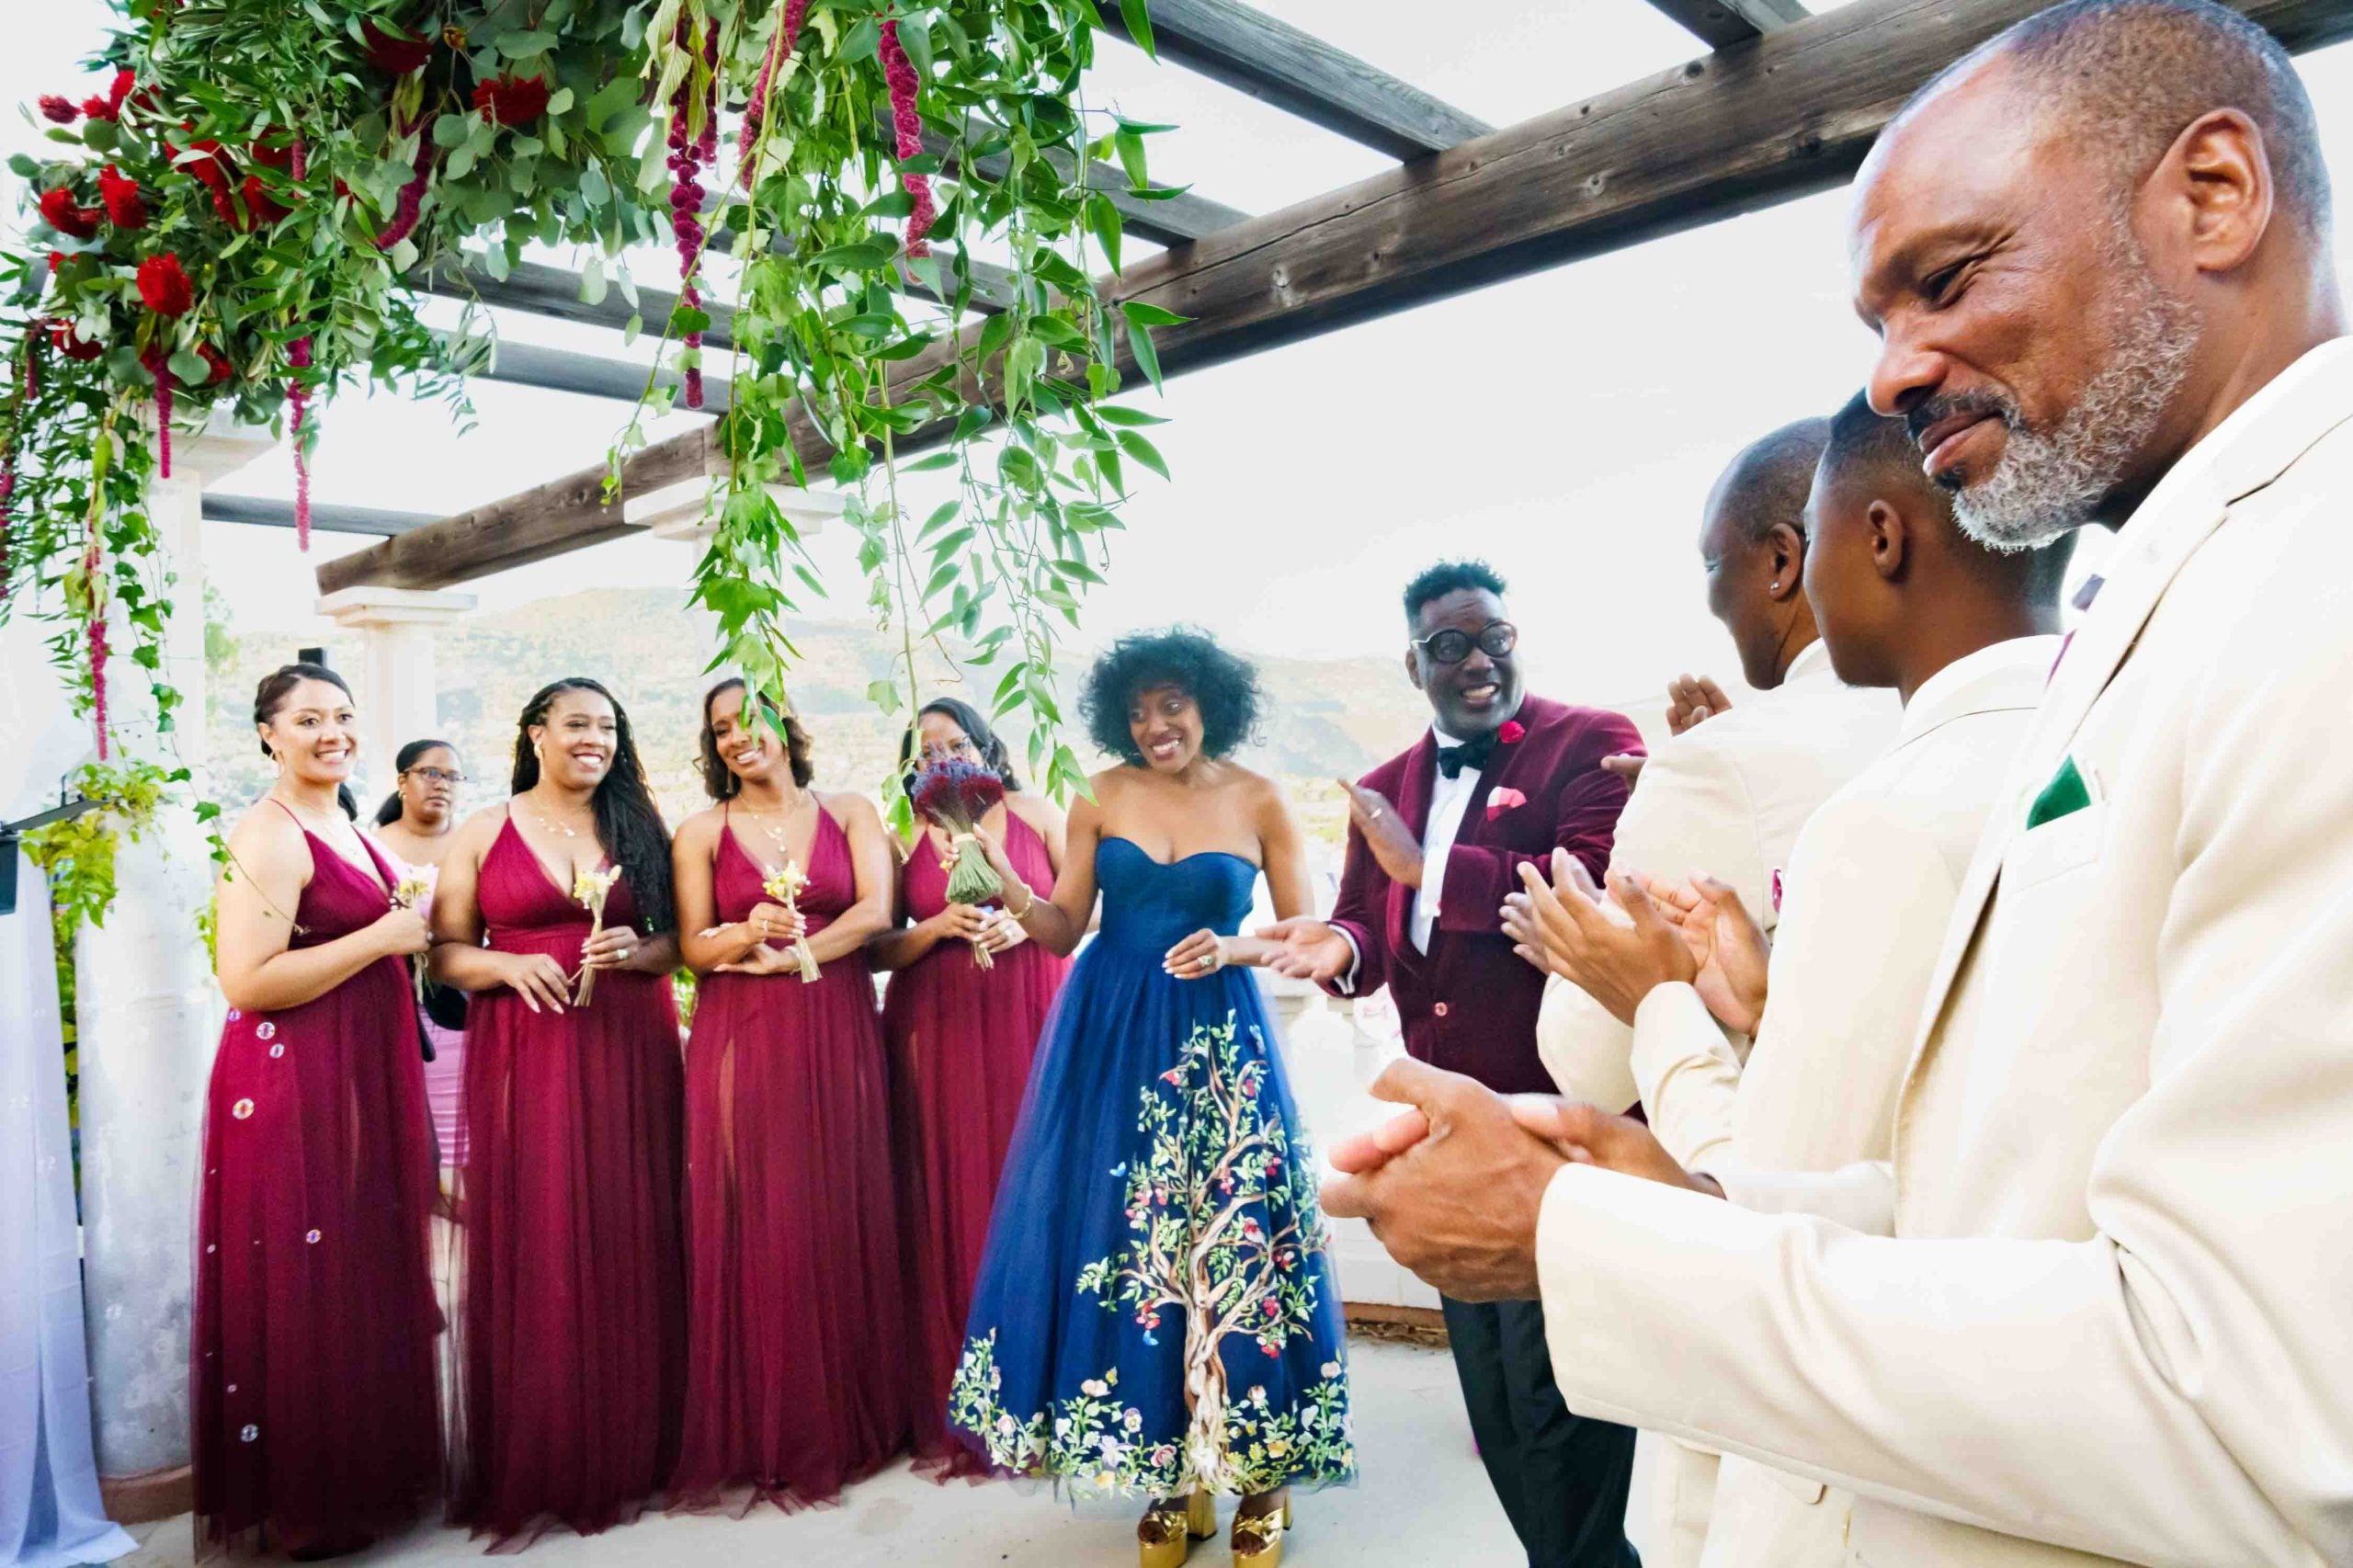 Bridal Bliss: For Kevin And Syreeta's Nuptials In The South Of France, The Bride Ditched White For 'Something Blue'